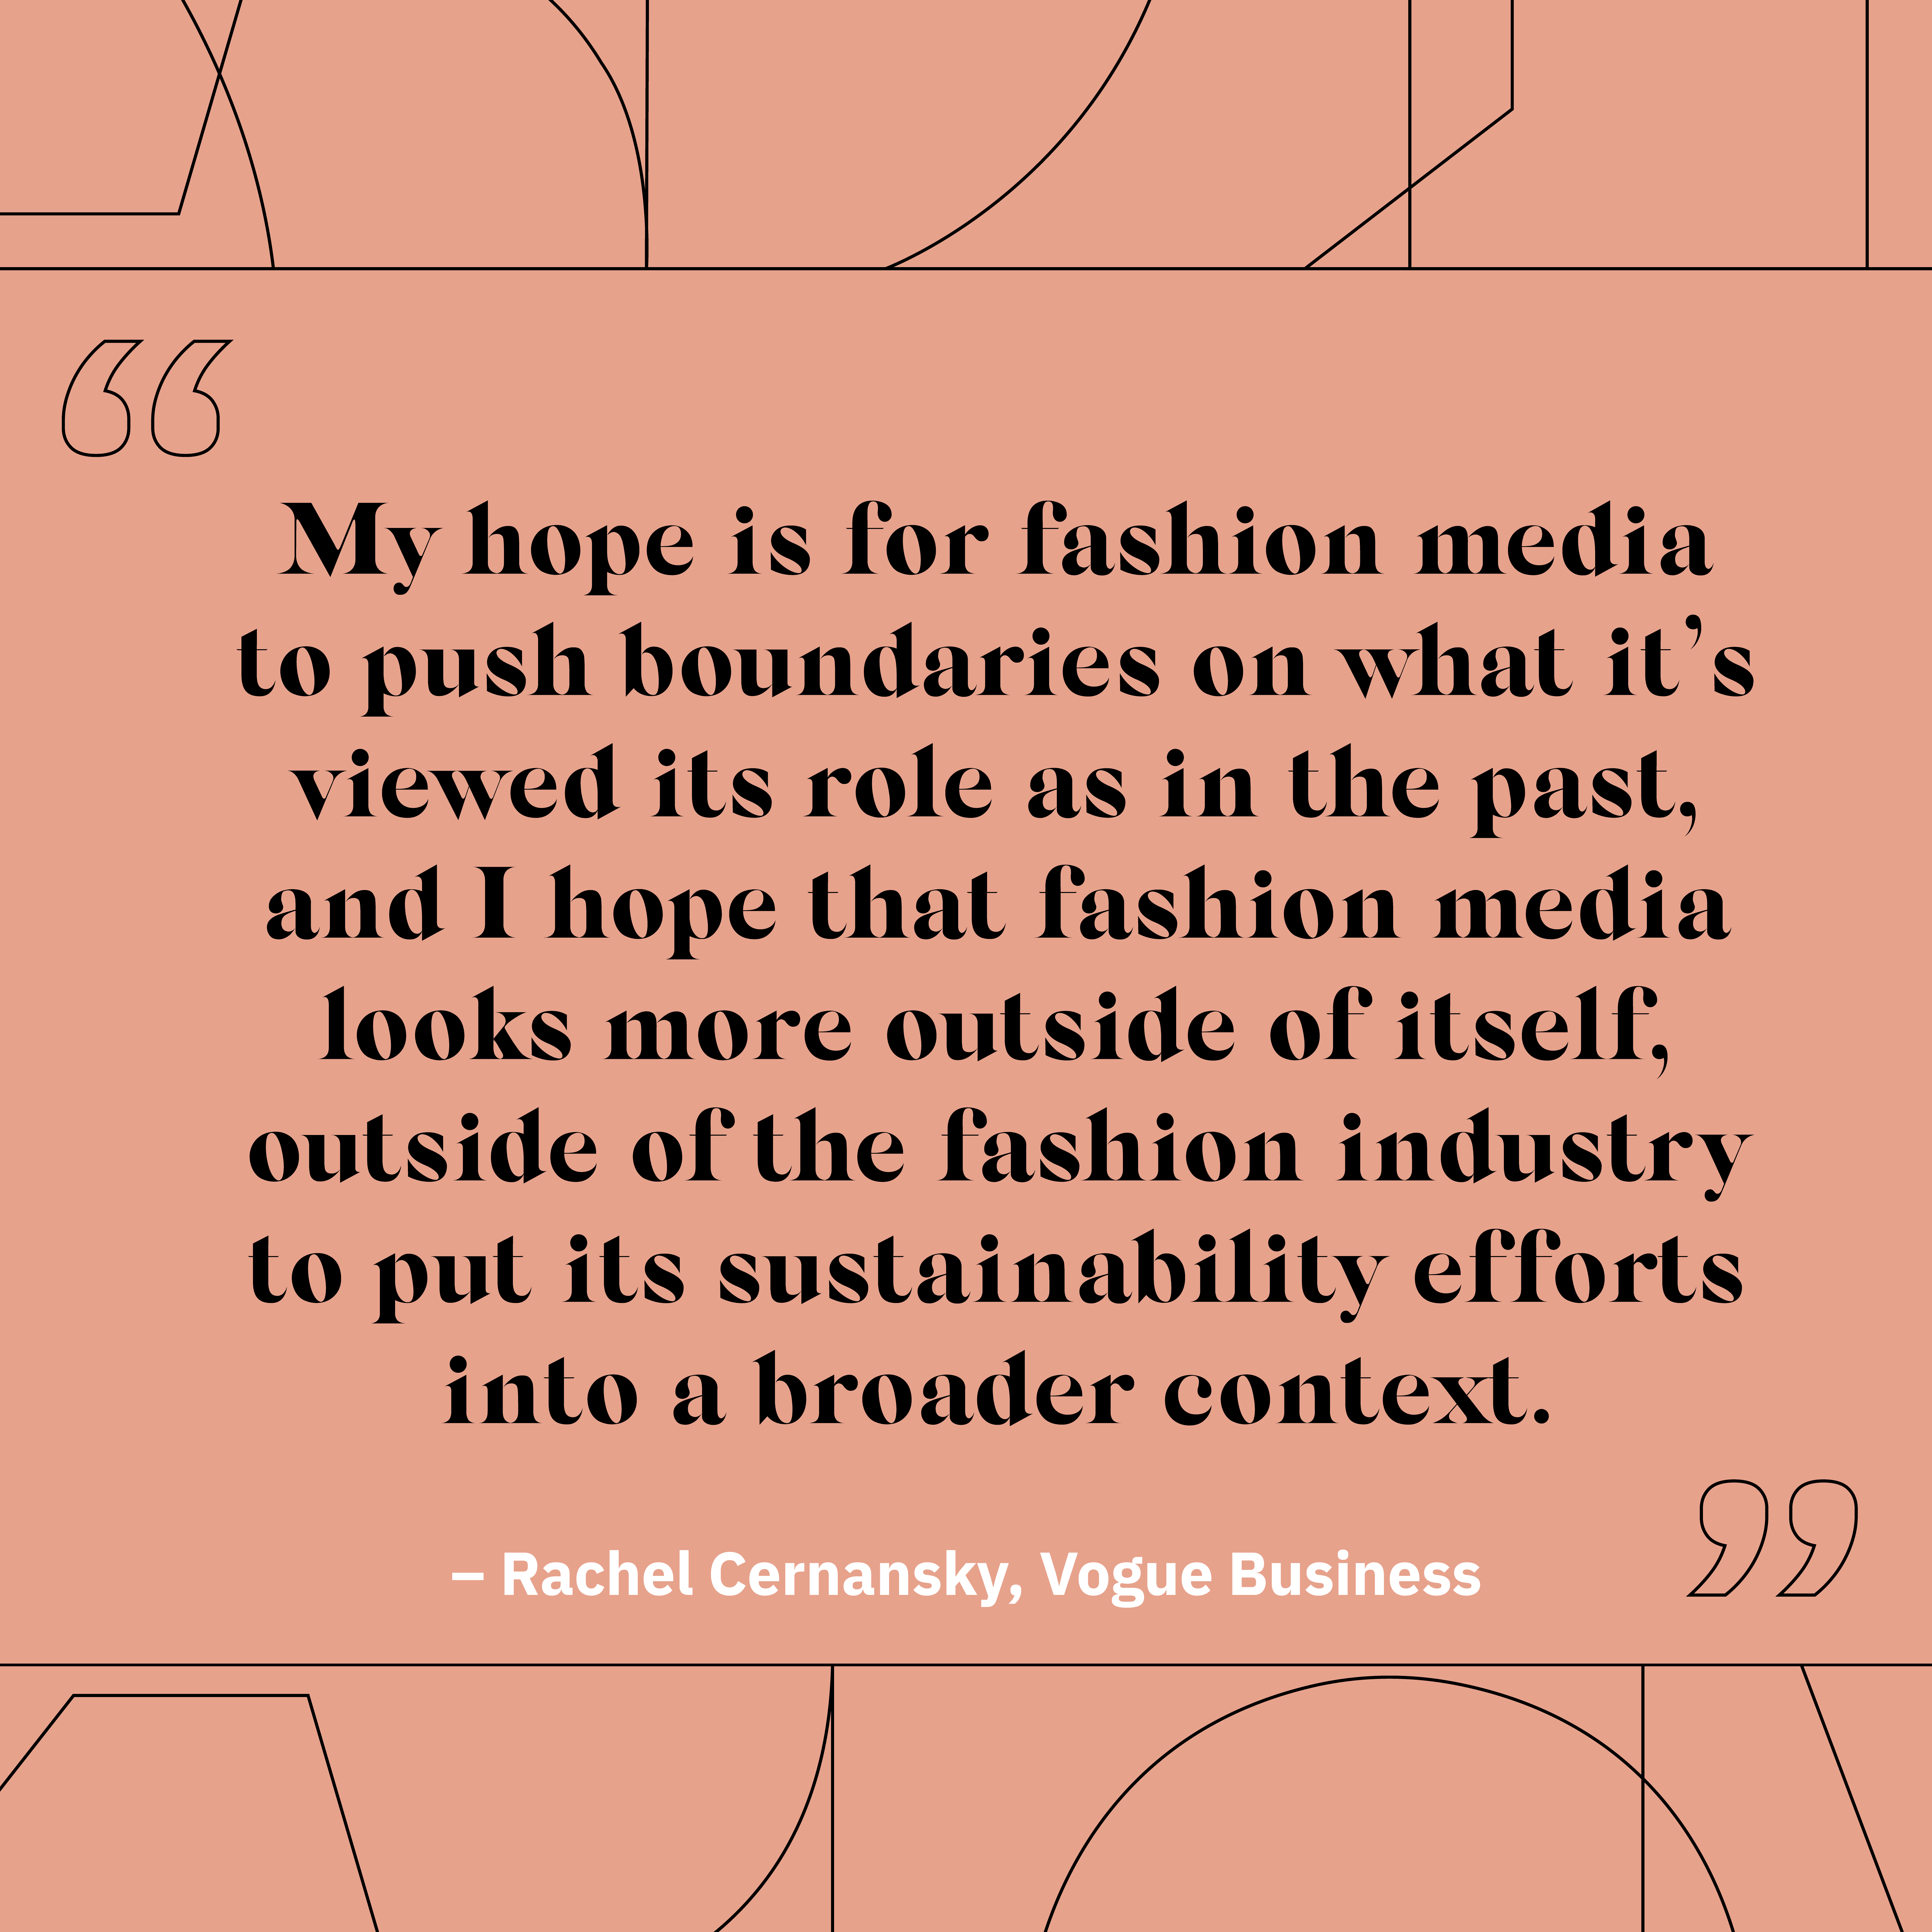 “My hope is for fashion media to push boundaries on what it’s viewed its role as in the past, and I hope that fashion media looks more outside of itself, outside of the fashion industry to put its sustainability efforts into a broader context.”  – Rachel Cernansky, Vogue Business 